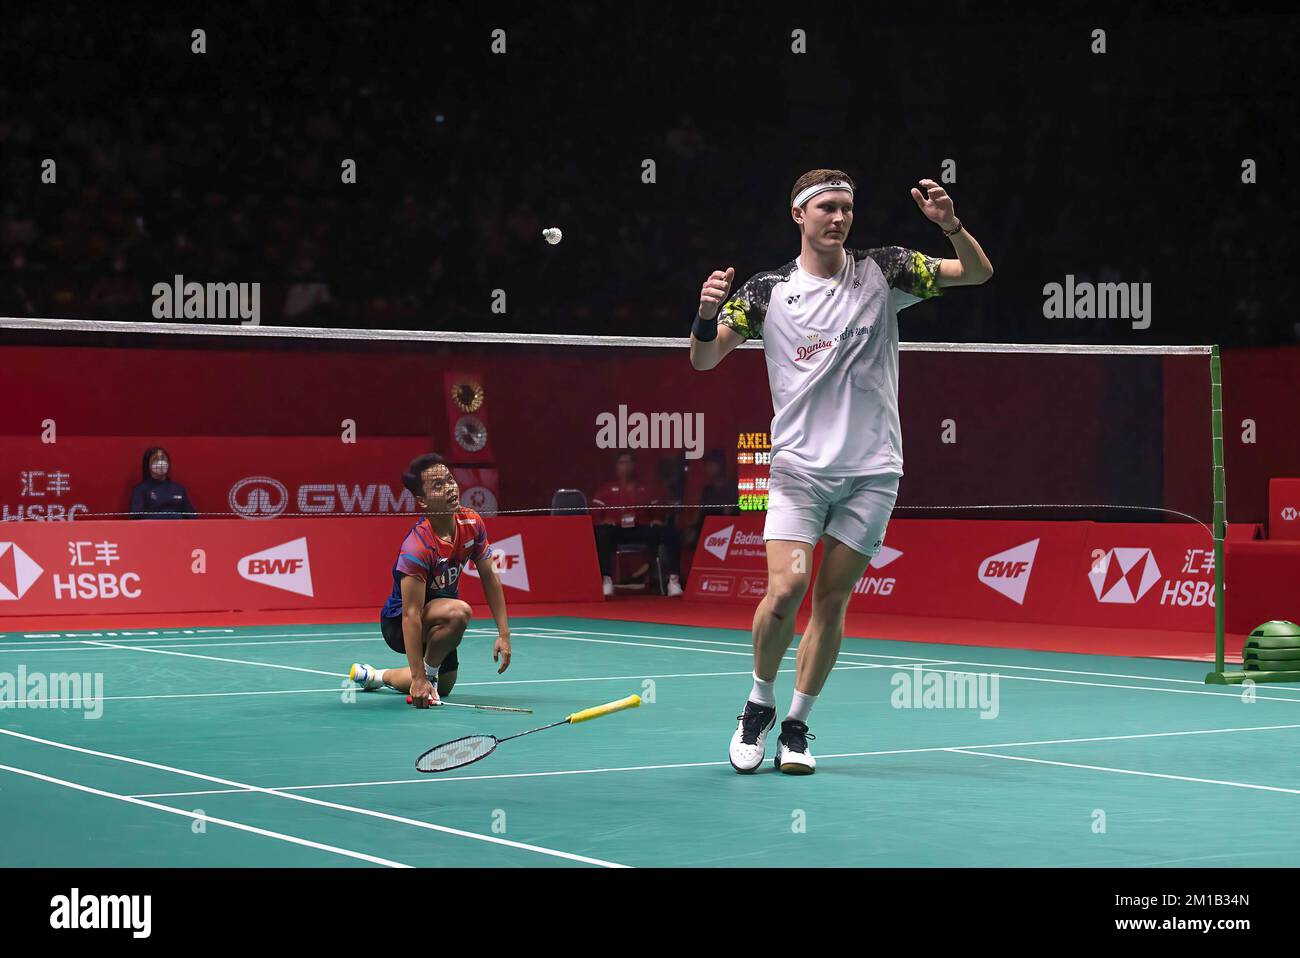 Viktor Axelsen of Denmark plays against Anthony Sinisuka Ginting of Indonesia during the Badminton Mens single Final match in the HSBC BWF World Tour Finals 2022 at Nimibutr Stadium